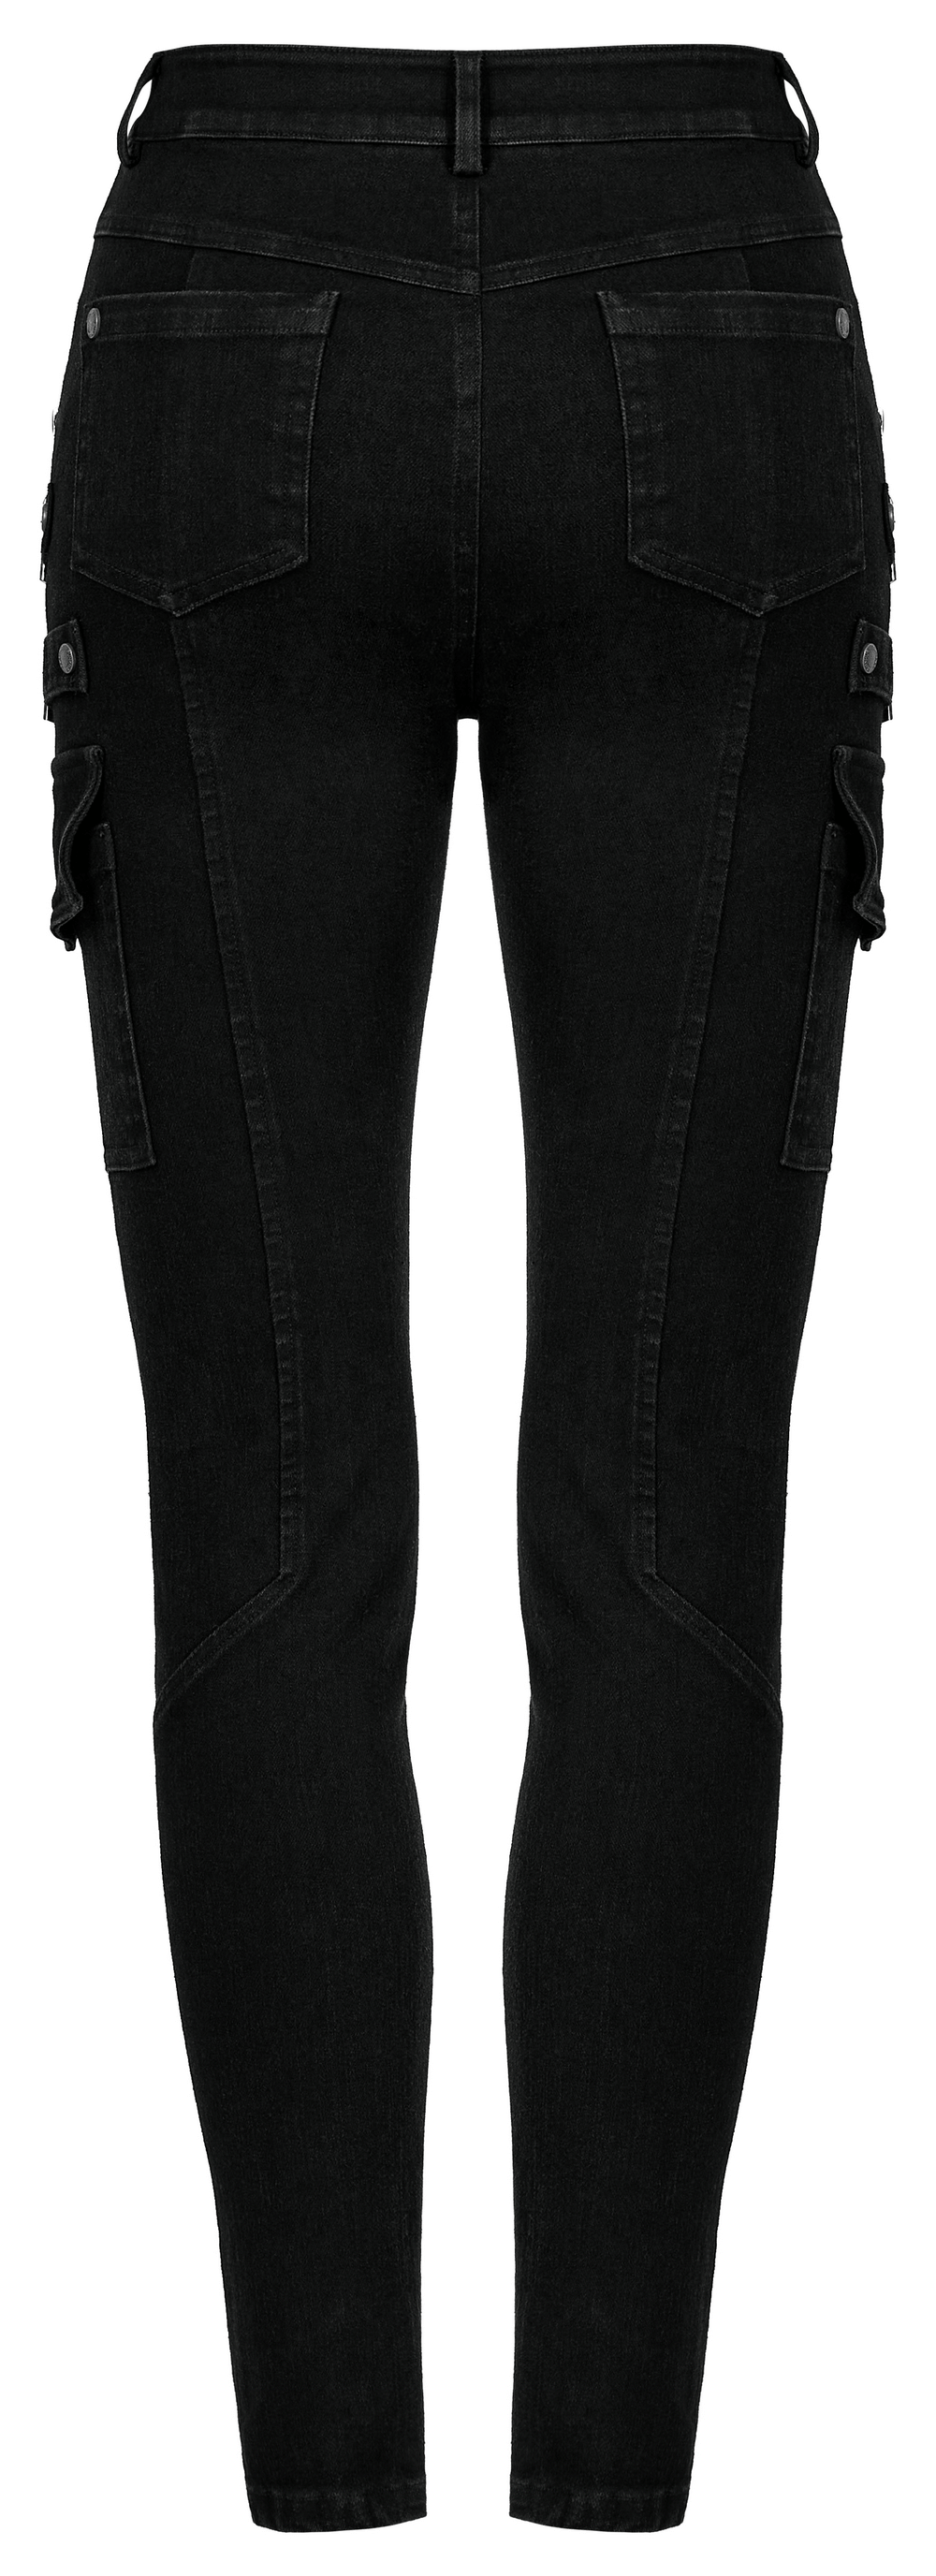 Urban Punk Zippered Skinny Jeans with Utility Loops - HARD'N'HEAVY